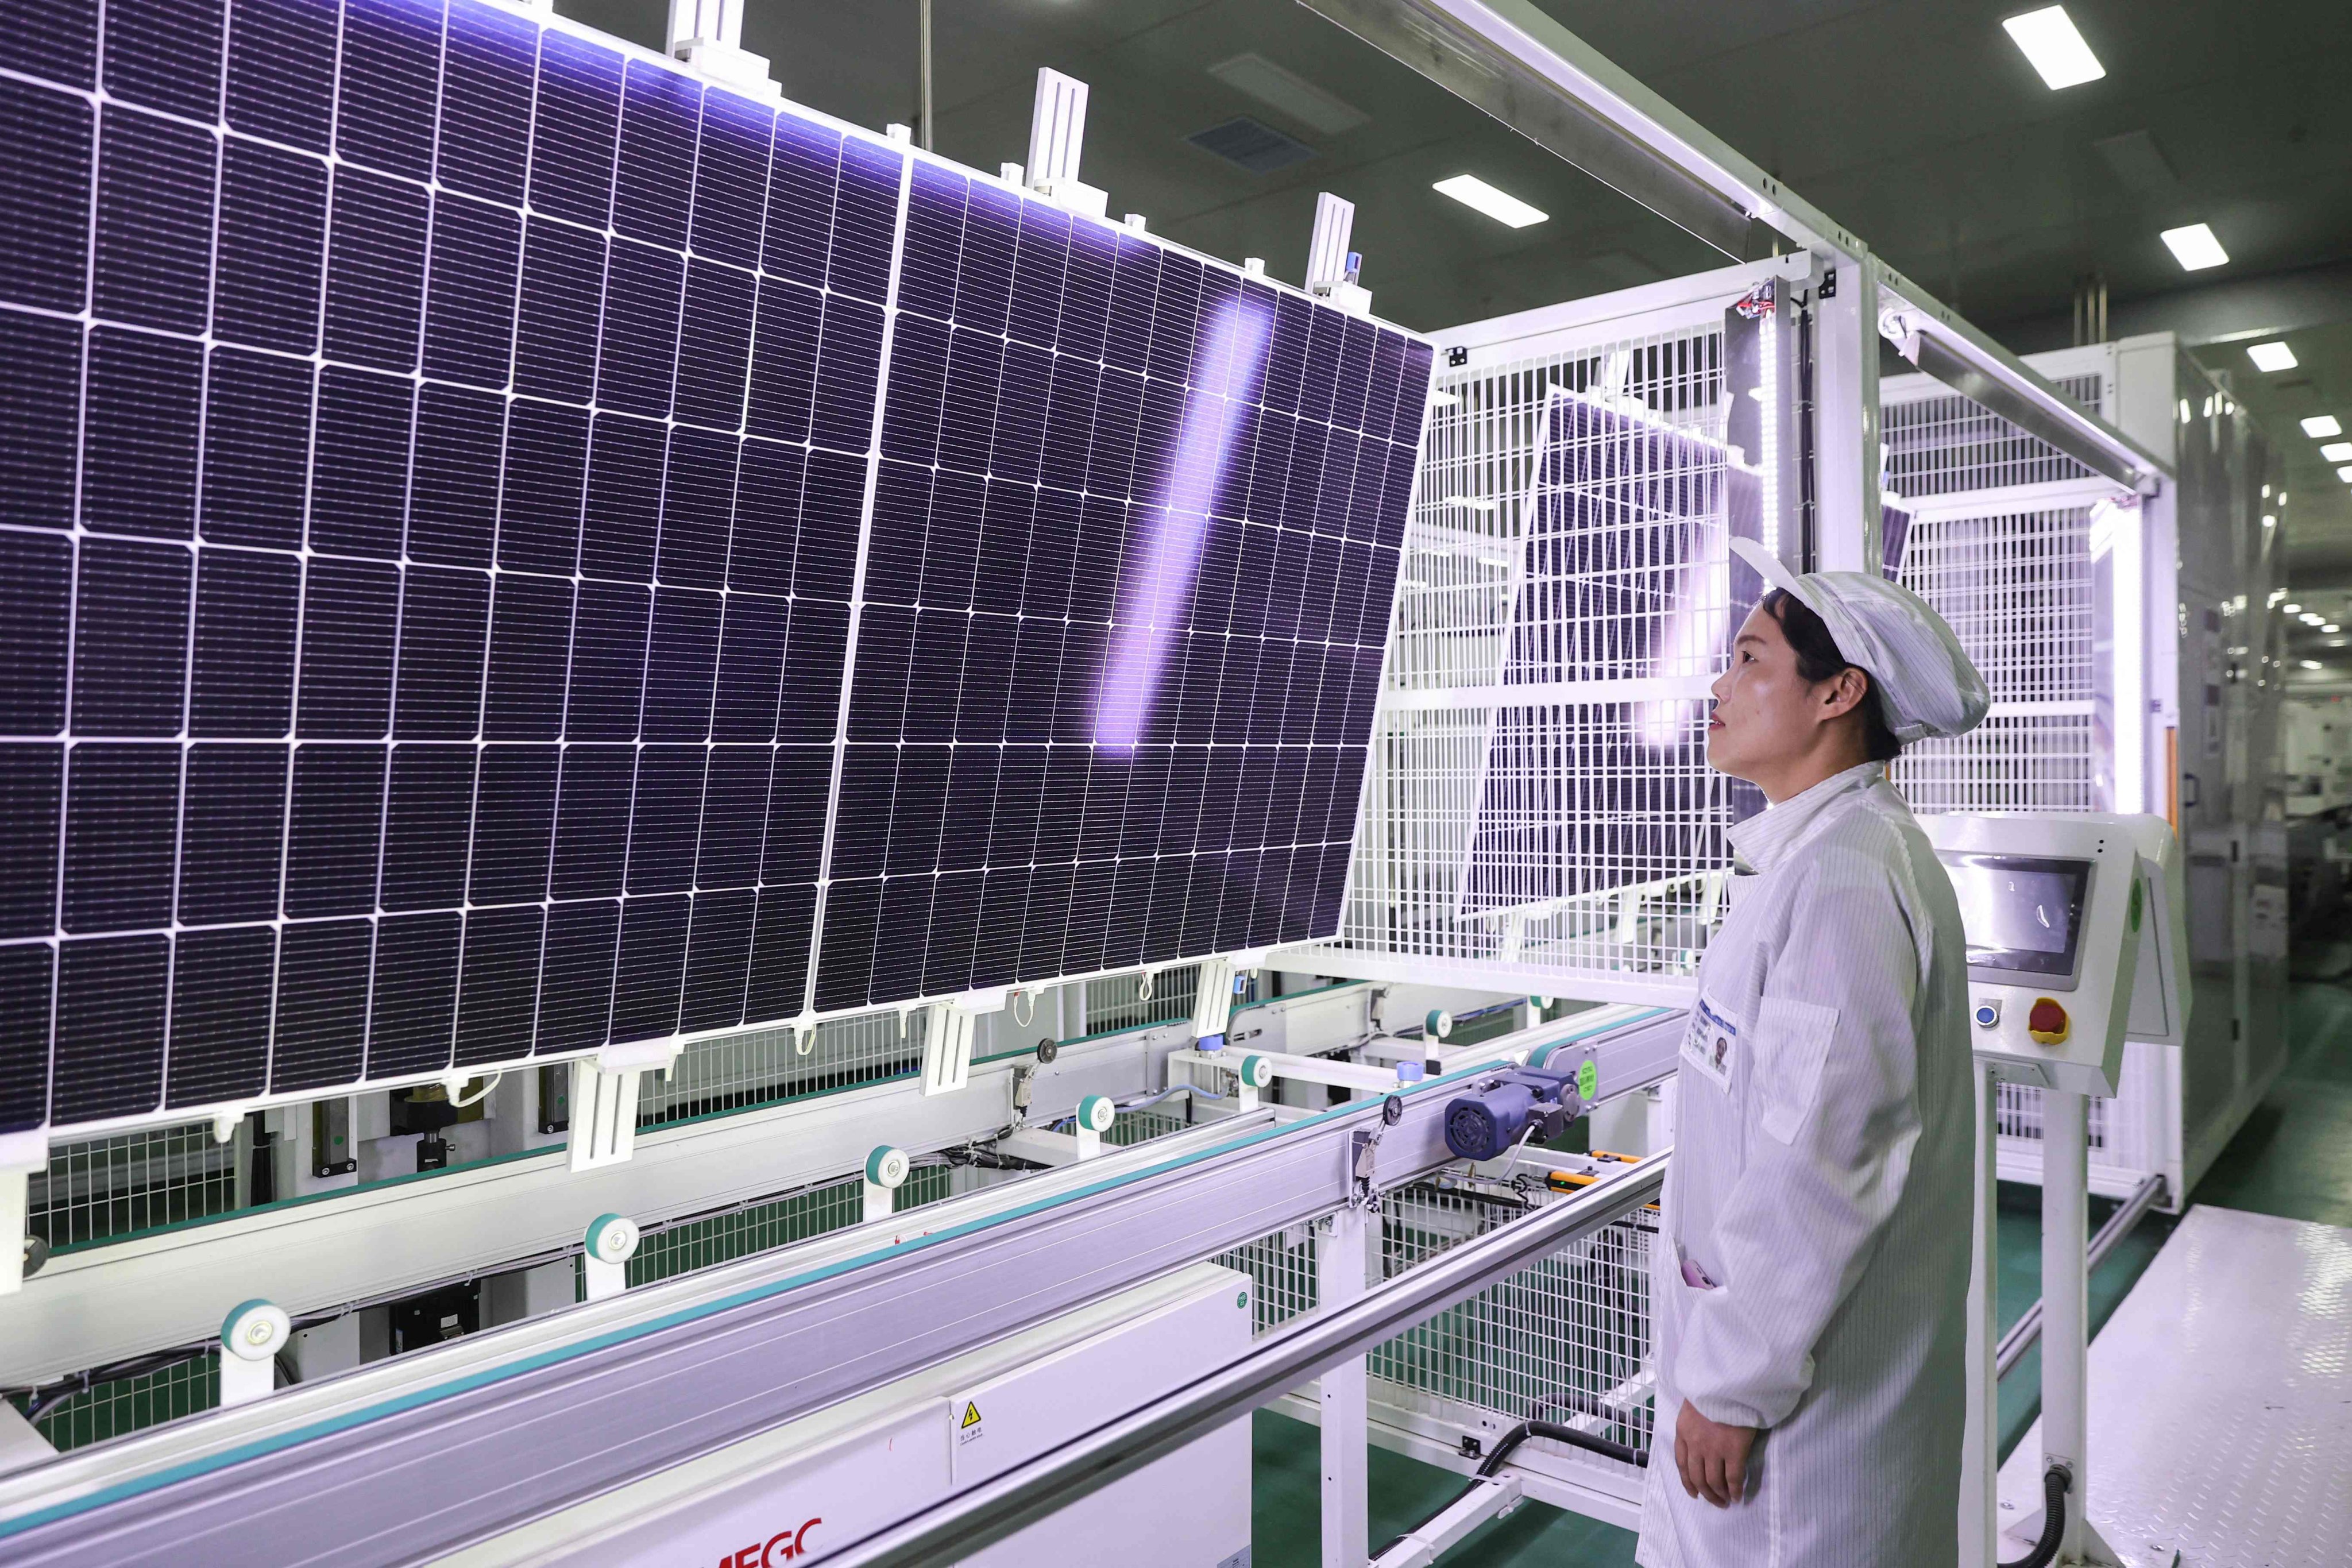 An employee works on solar photovoltaic modules that will be exported, at a factory in Lianyungang, Jiangsu province, on January 4.  China is investing heavily in the technologies, such as renewable energy, electric vehicles and AI, that will shape the global economy in the coming decades. Photo: AFP